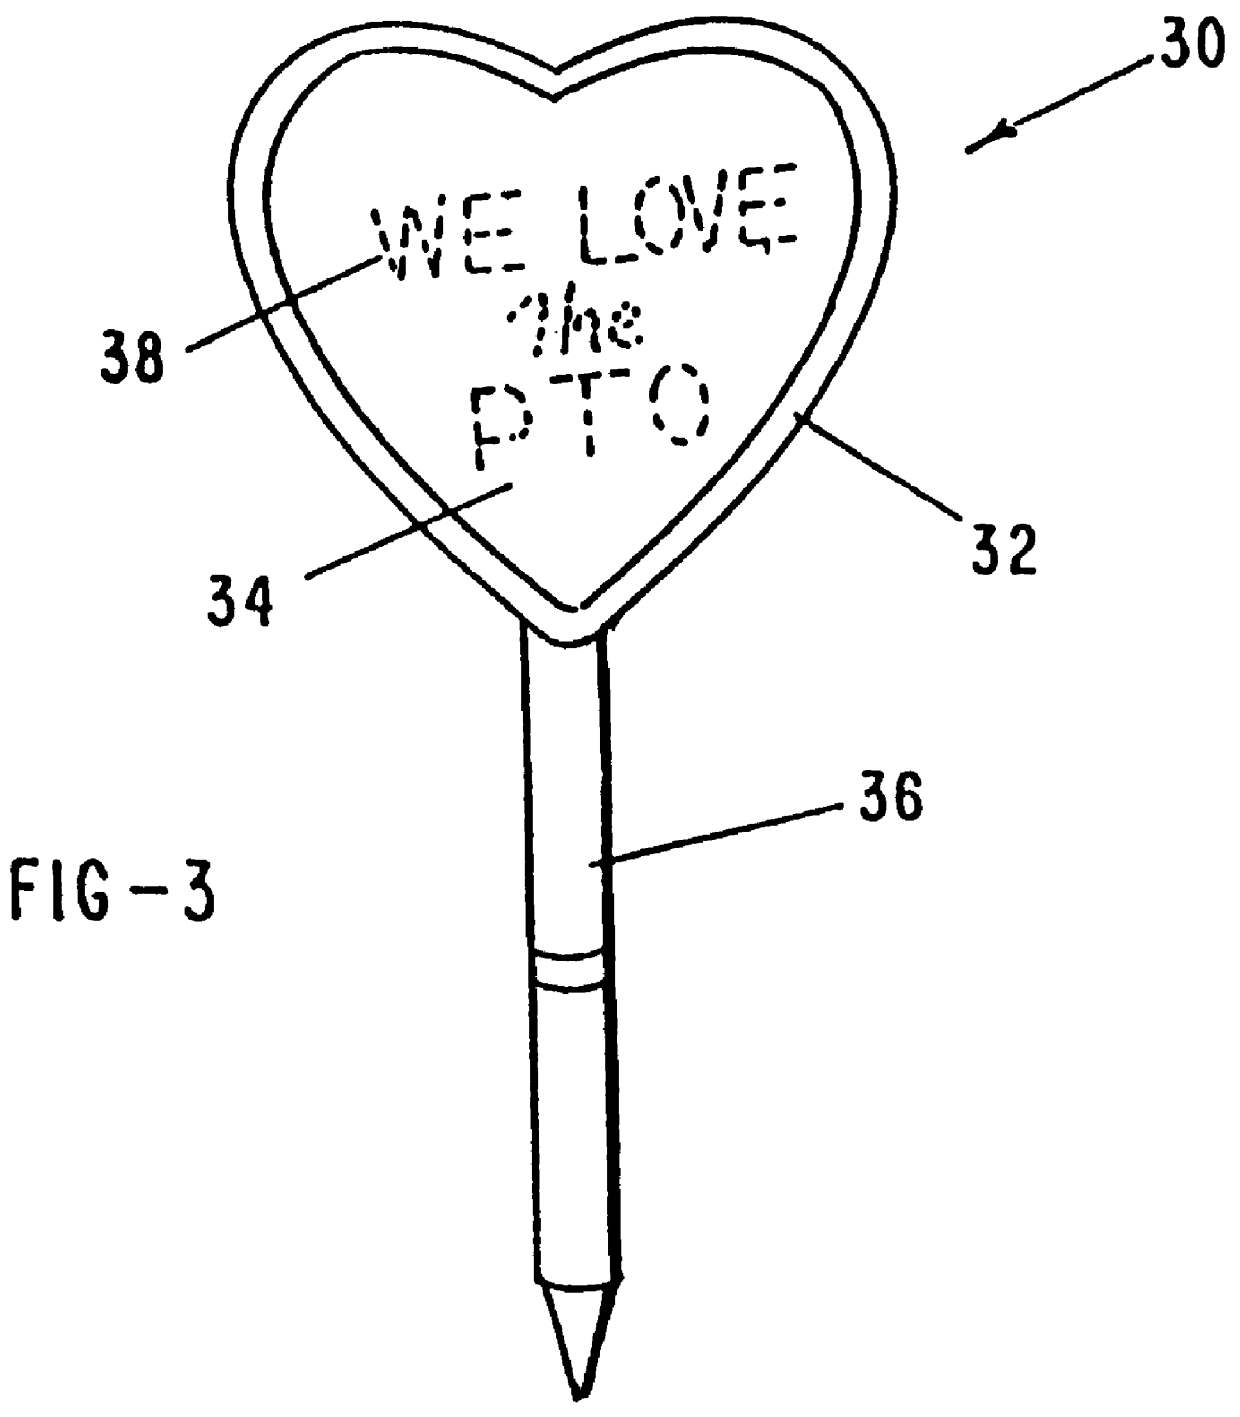 Writing implement attachment